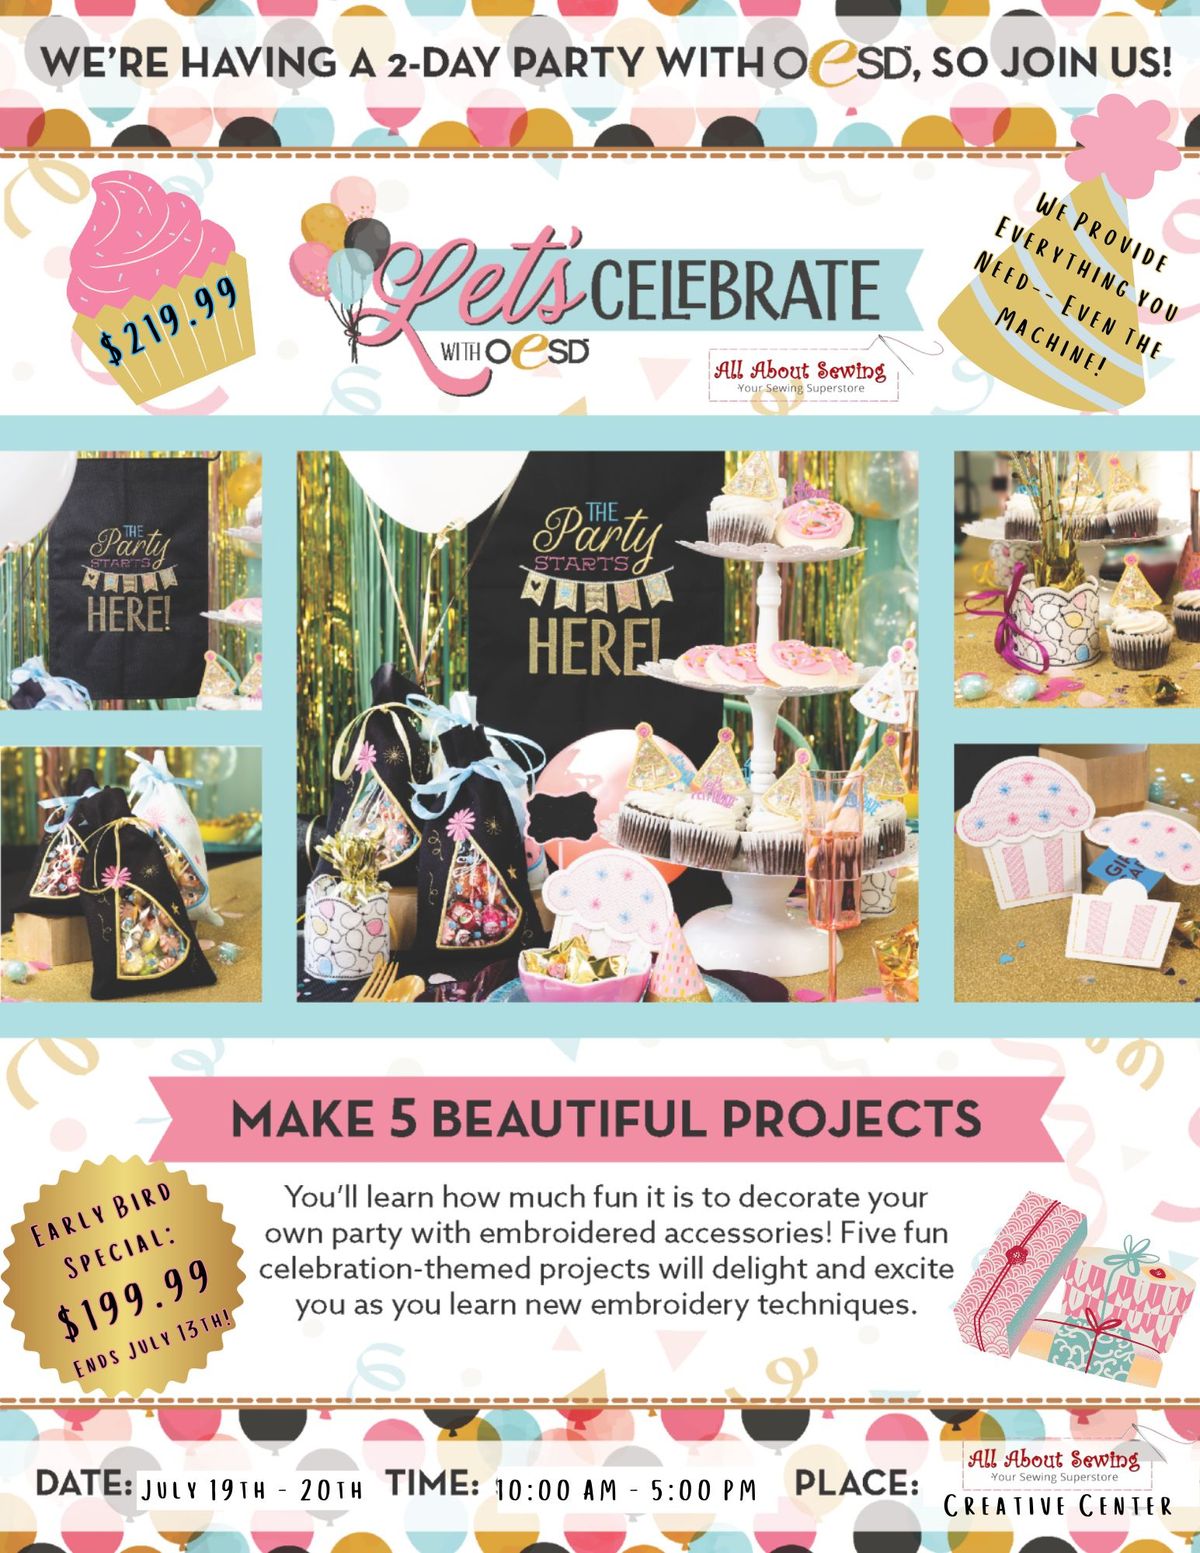 OESD: Let's Celebrate! - Early Bird Special:  $199.99 until 7\/13 -- Sign up allaboutsewinginc.com